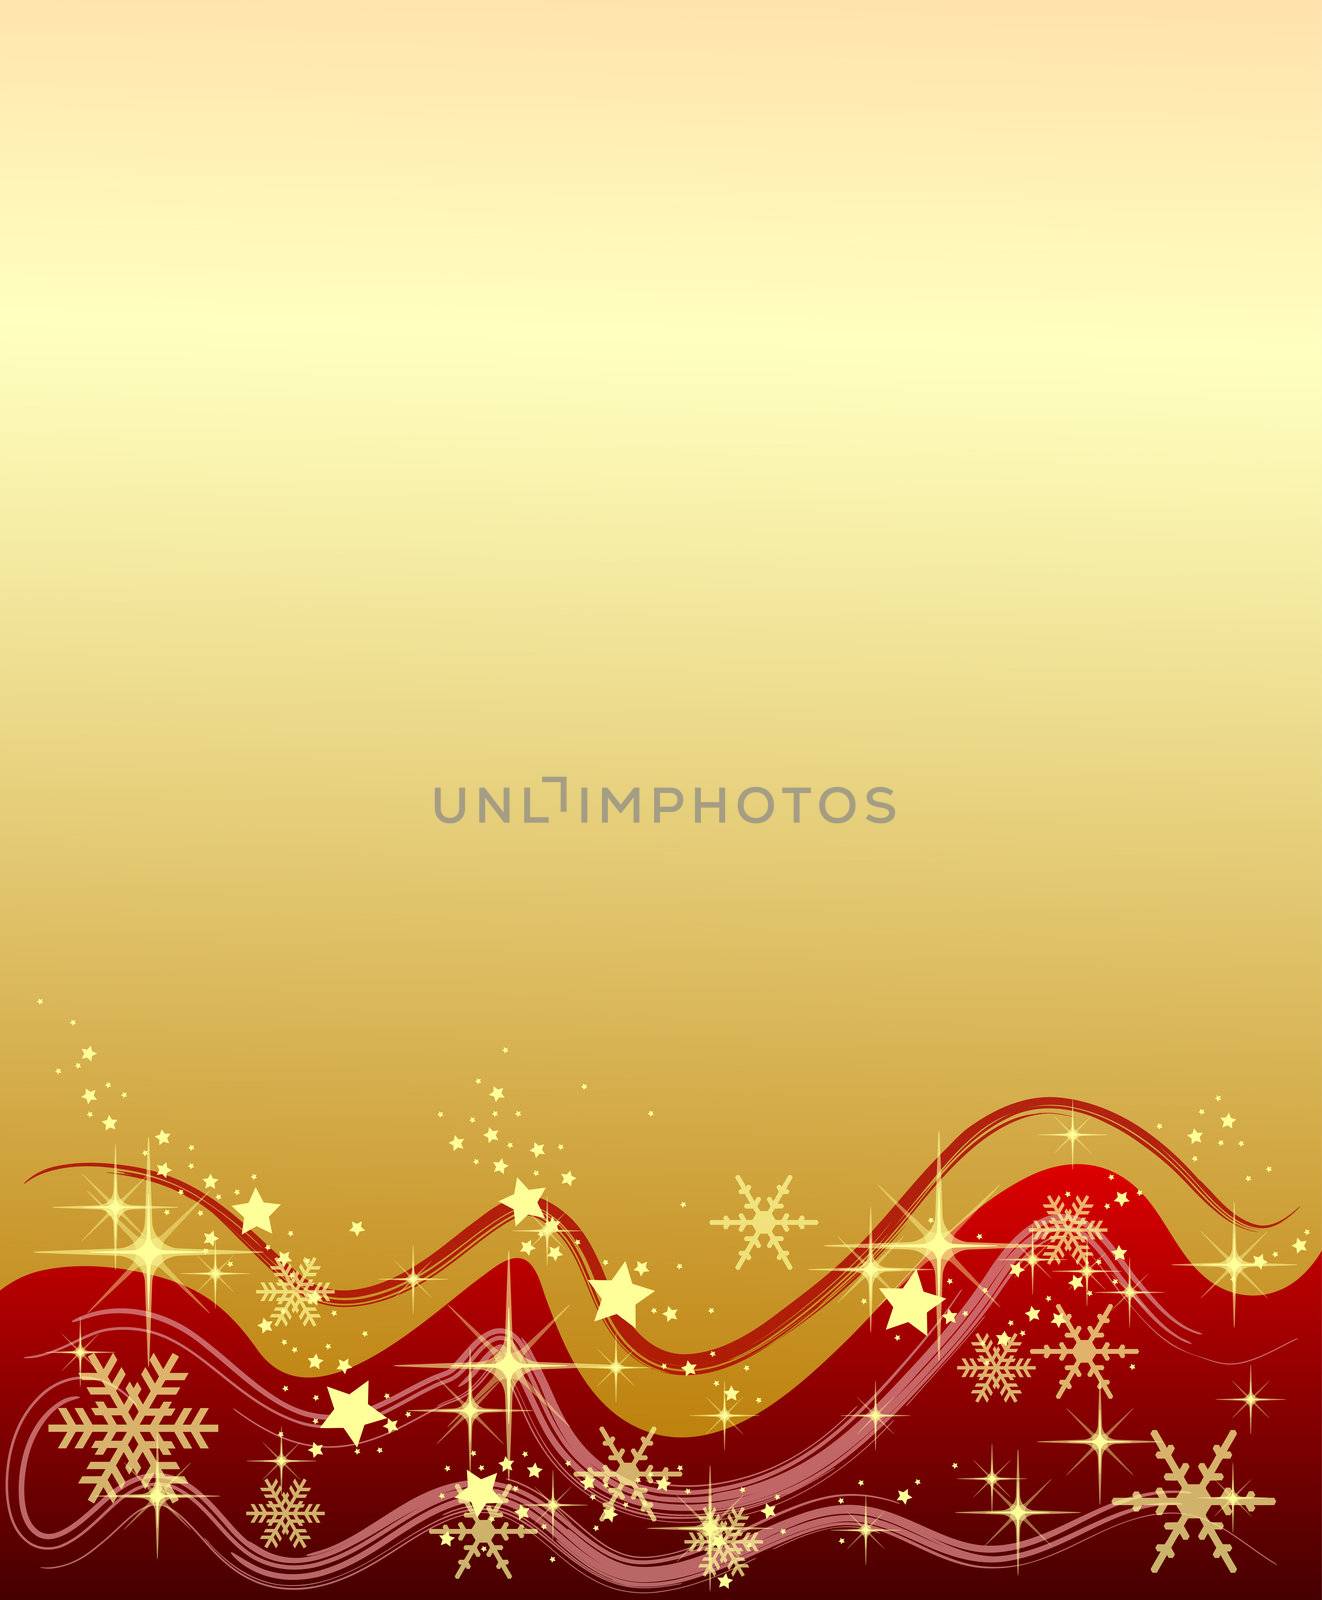 Illustration of a golden background with stars and snowflakes by peromarketing